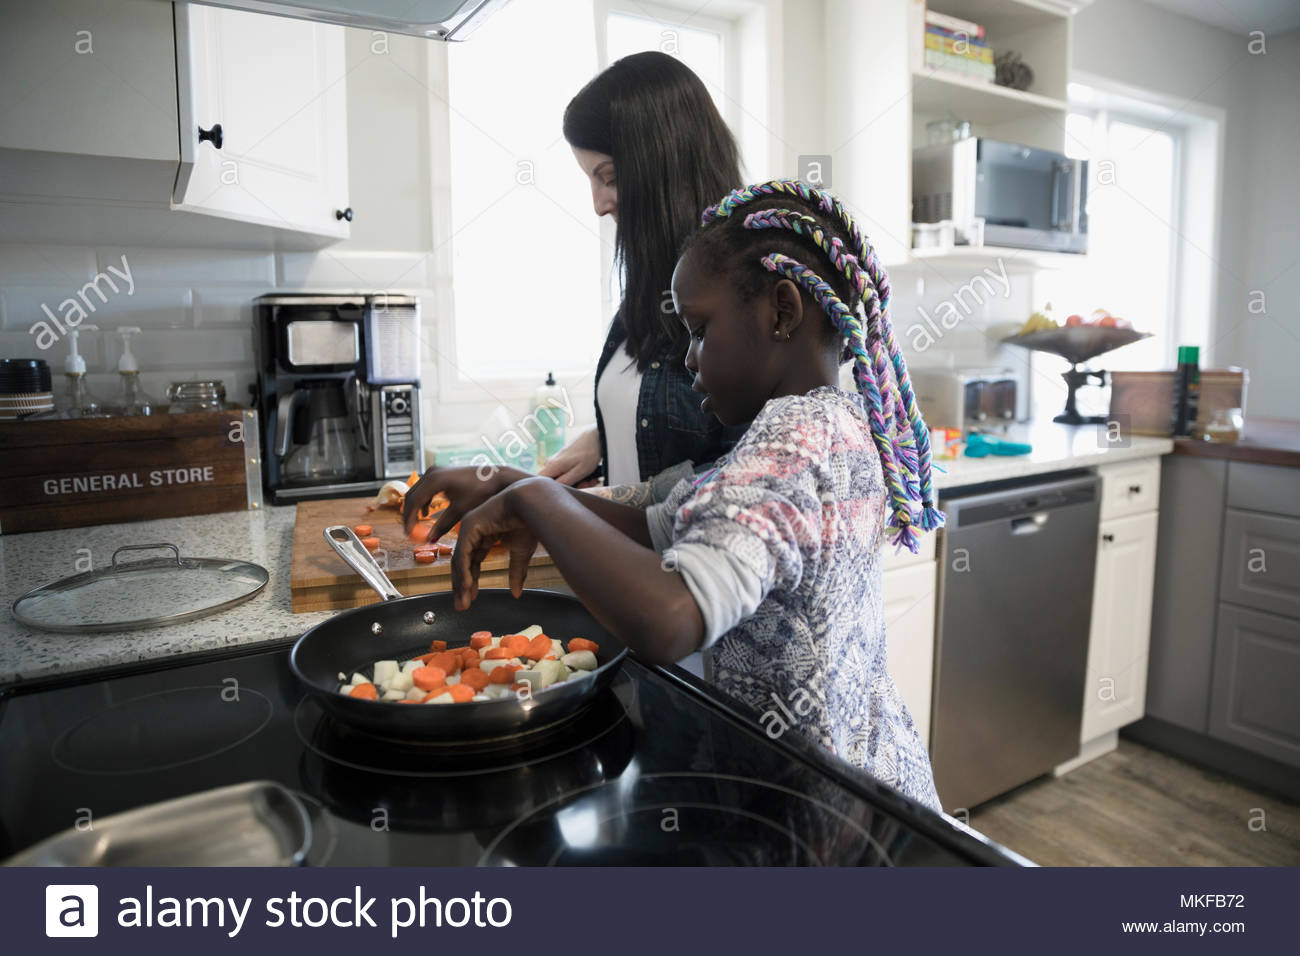 Mother and daughter preparing and cooking vegetables at kitchen stove Stock Photo